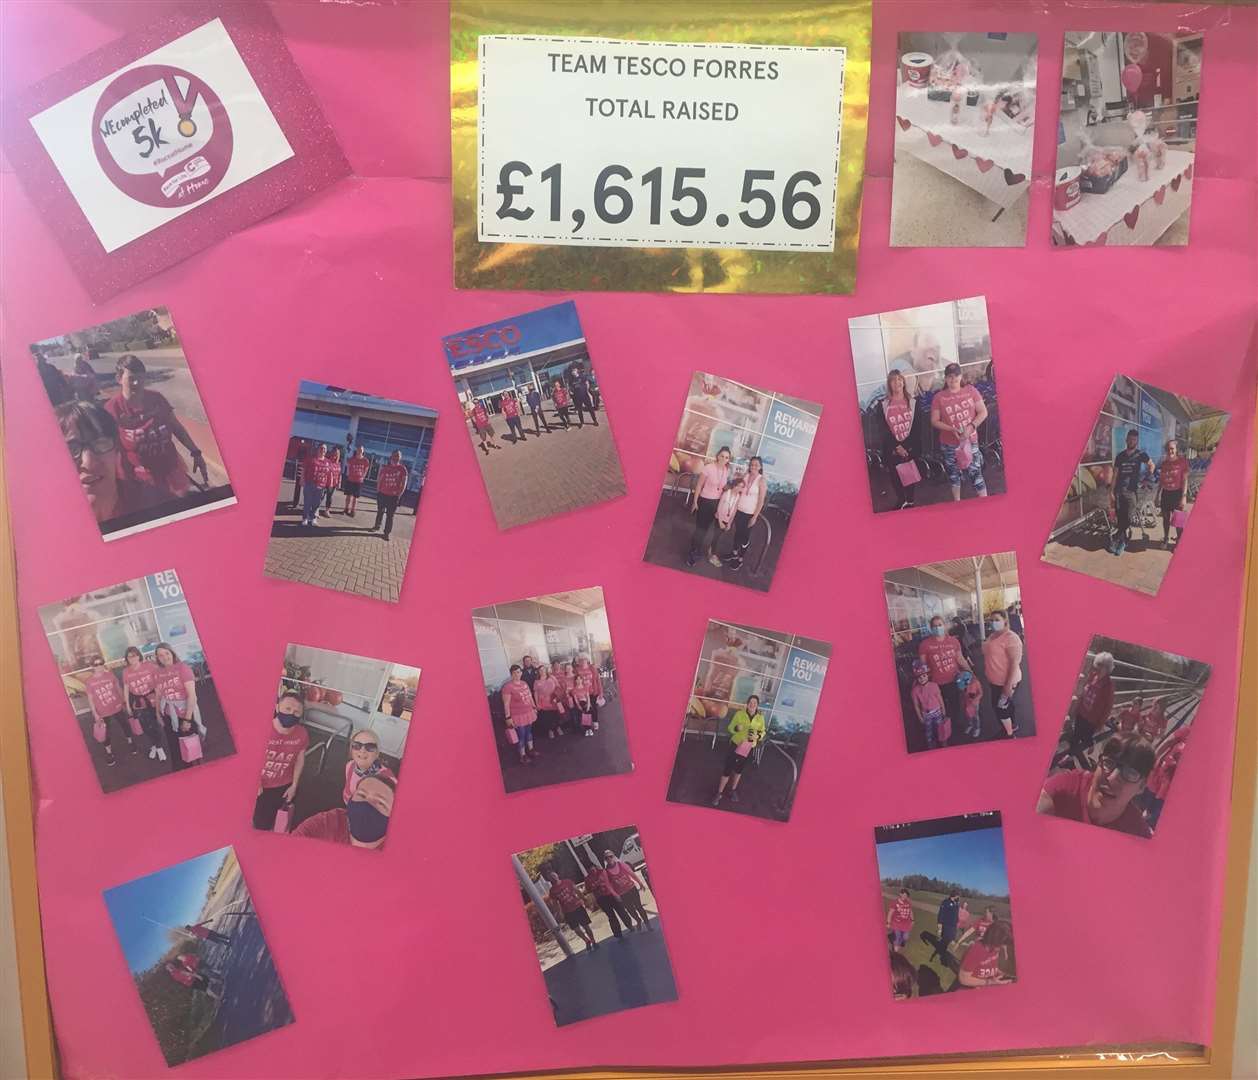 The Race for Life board of fame at Forres Tesco.